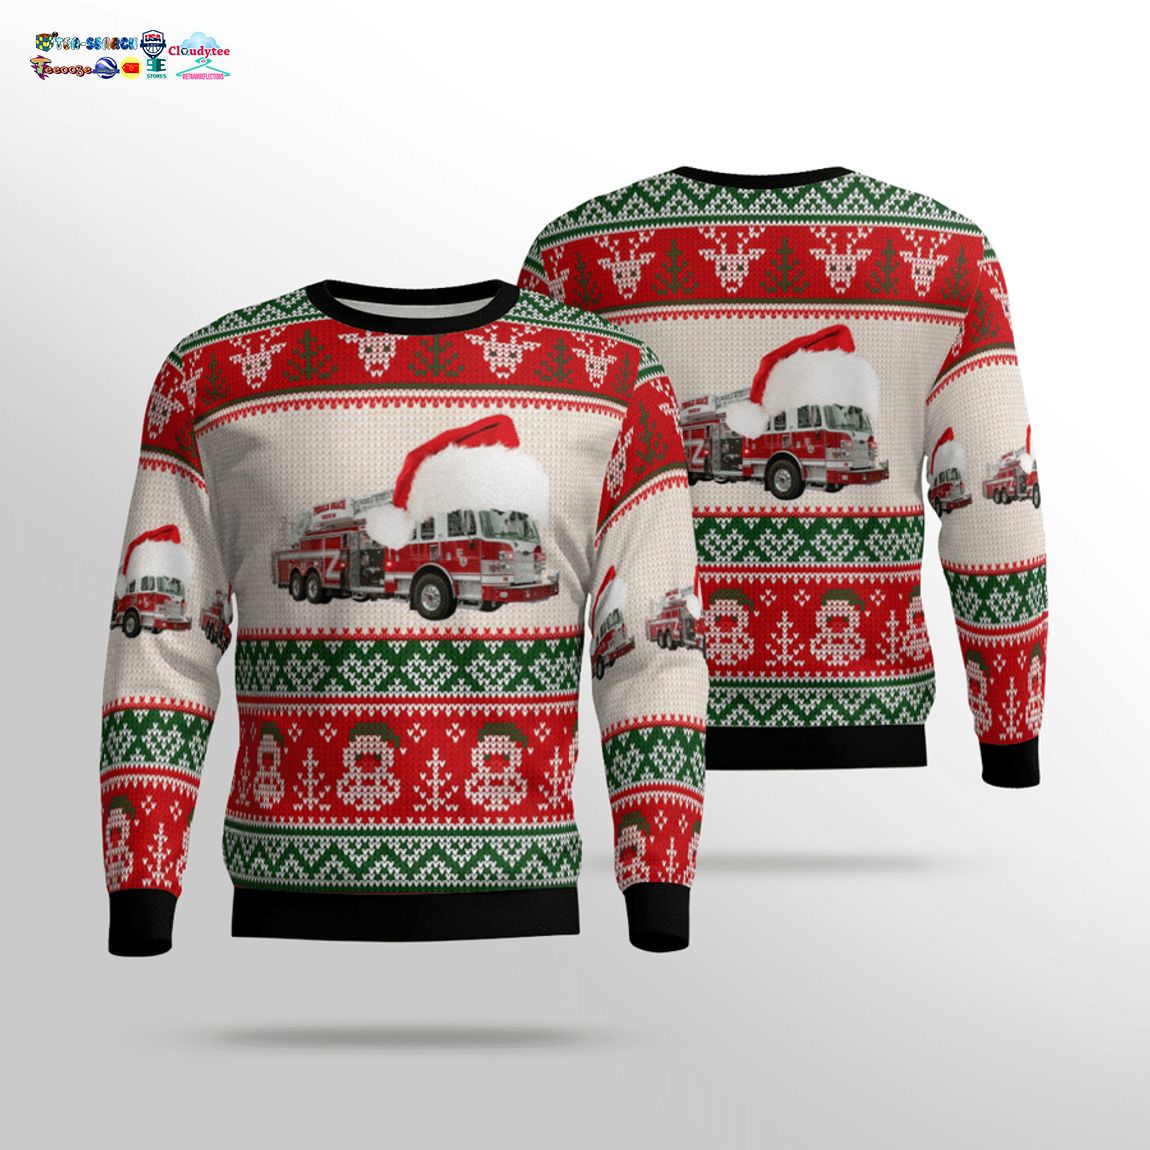 pebble-beach-community-services-district-cal-fire-3d-christmas-sweater-1-clRyp.jpg